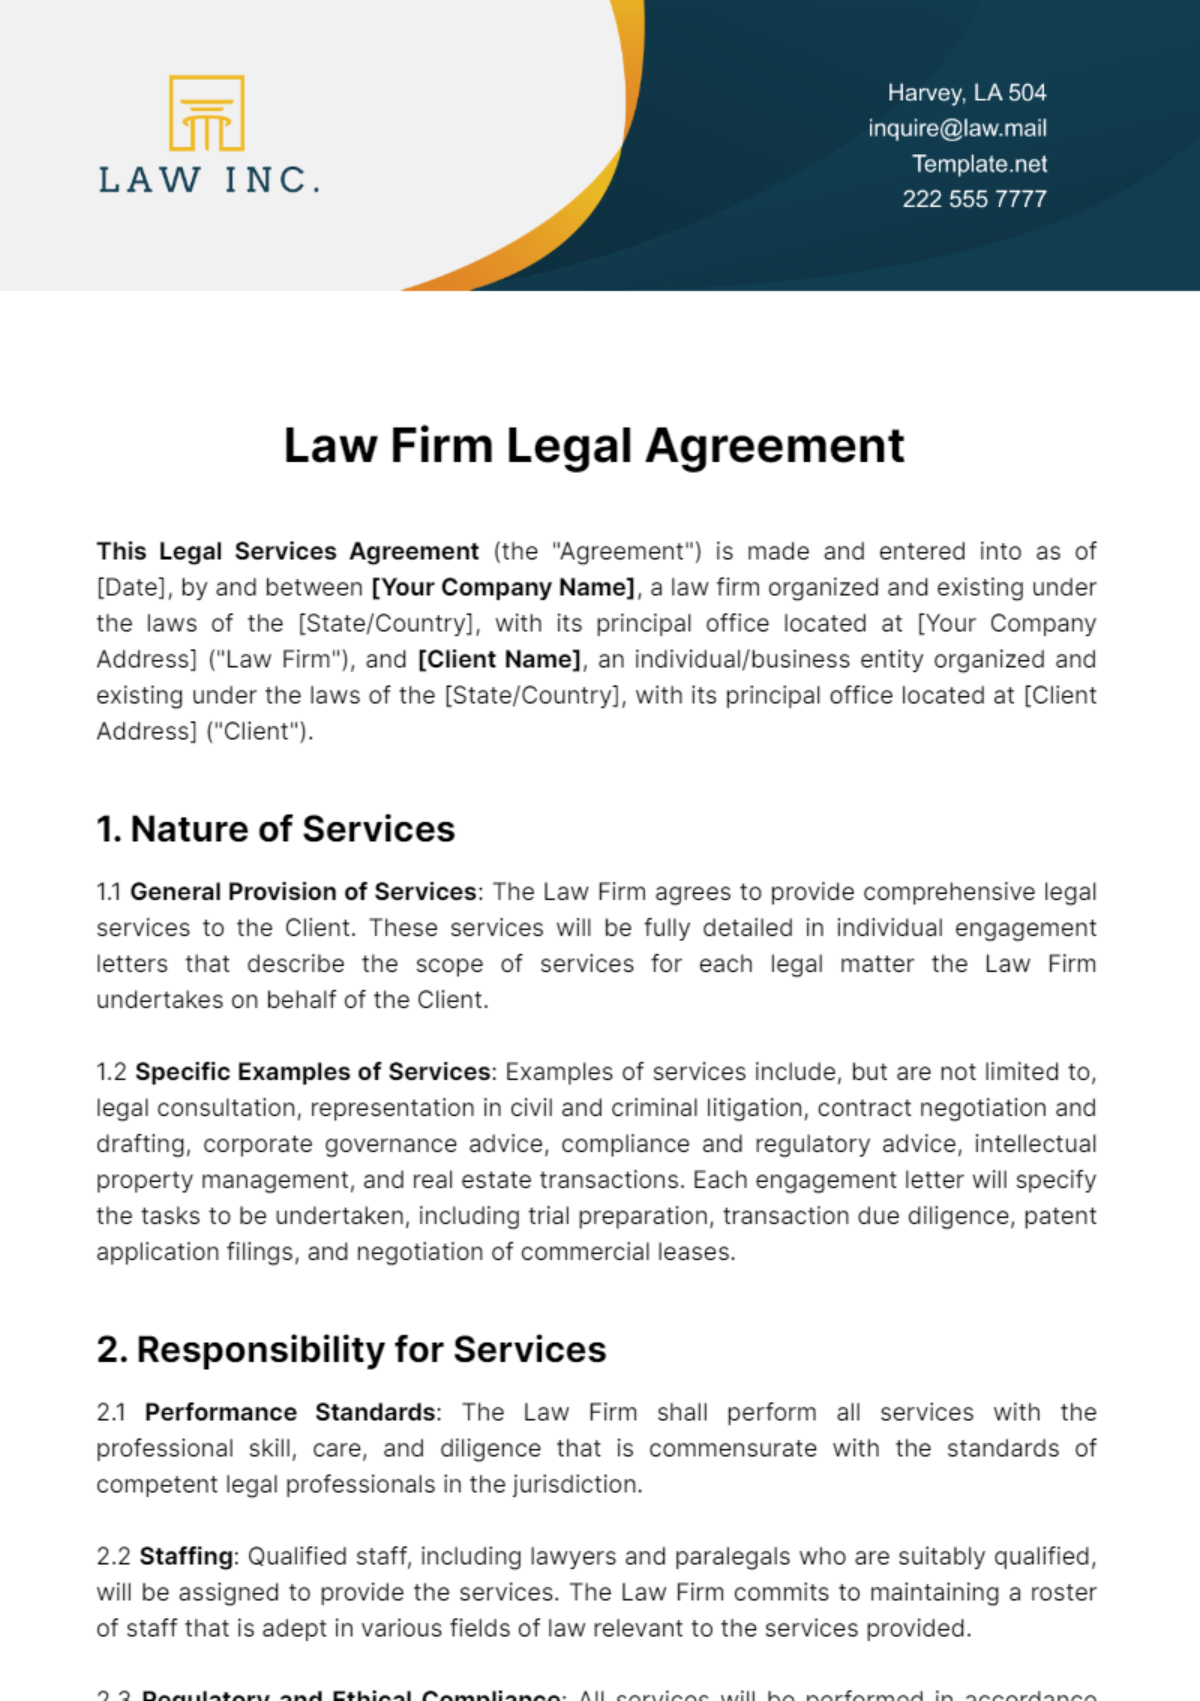 Free Law Firm Legal Agreement Template